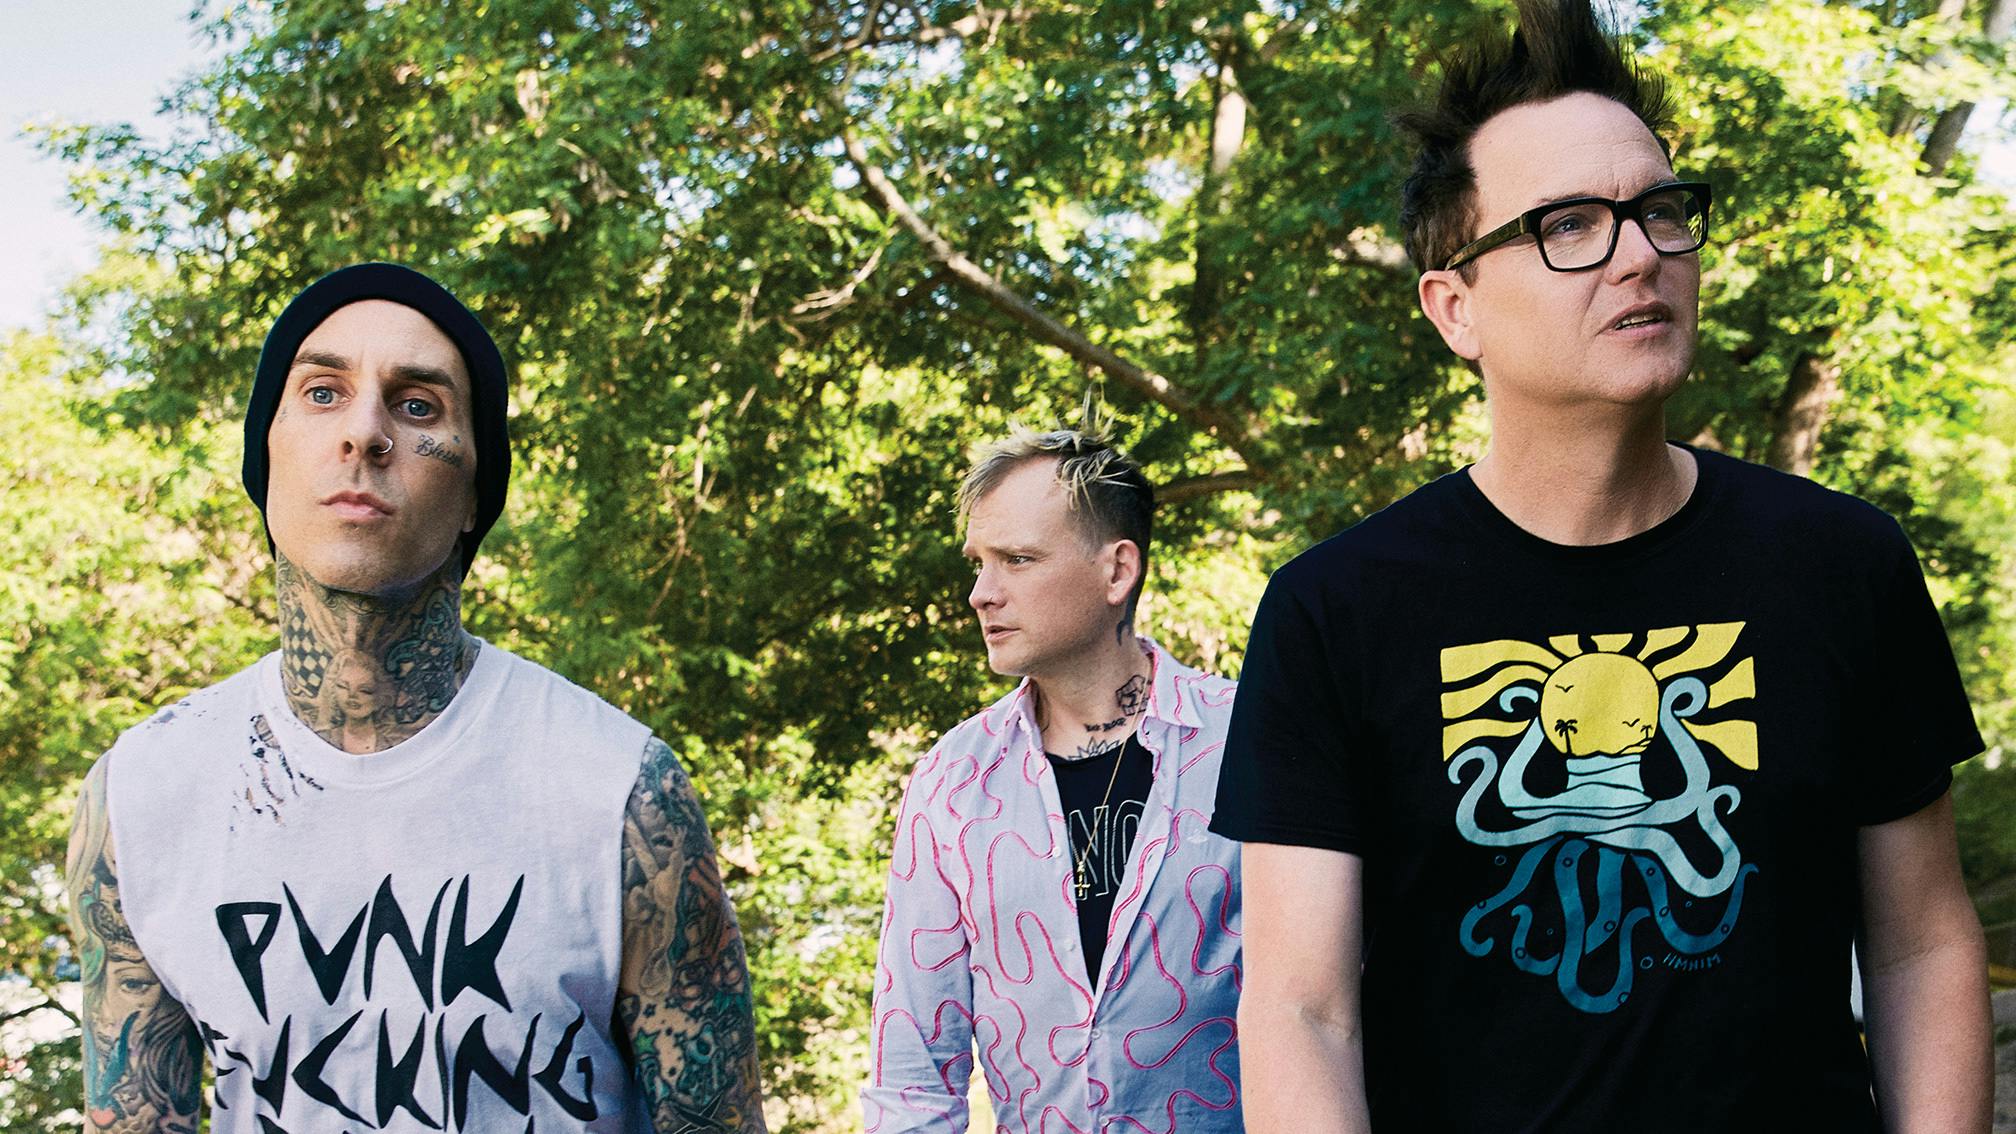 Travis Barker confirms blink-182 will release a new album this year